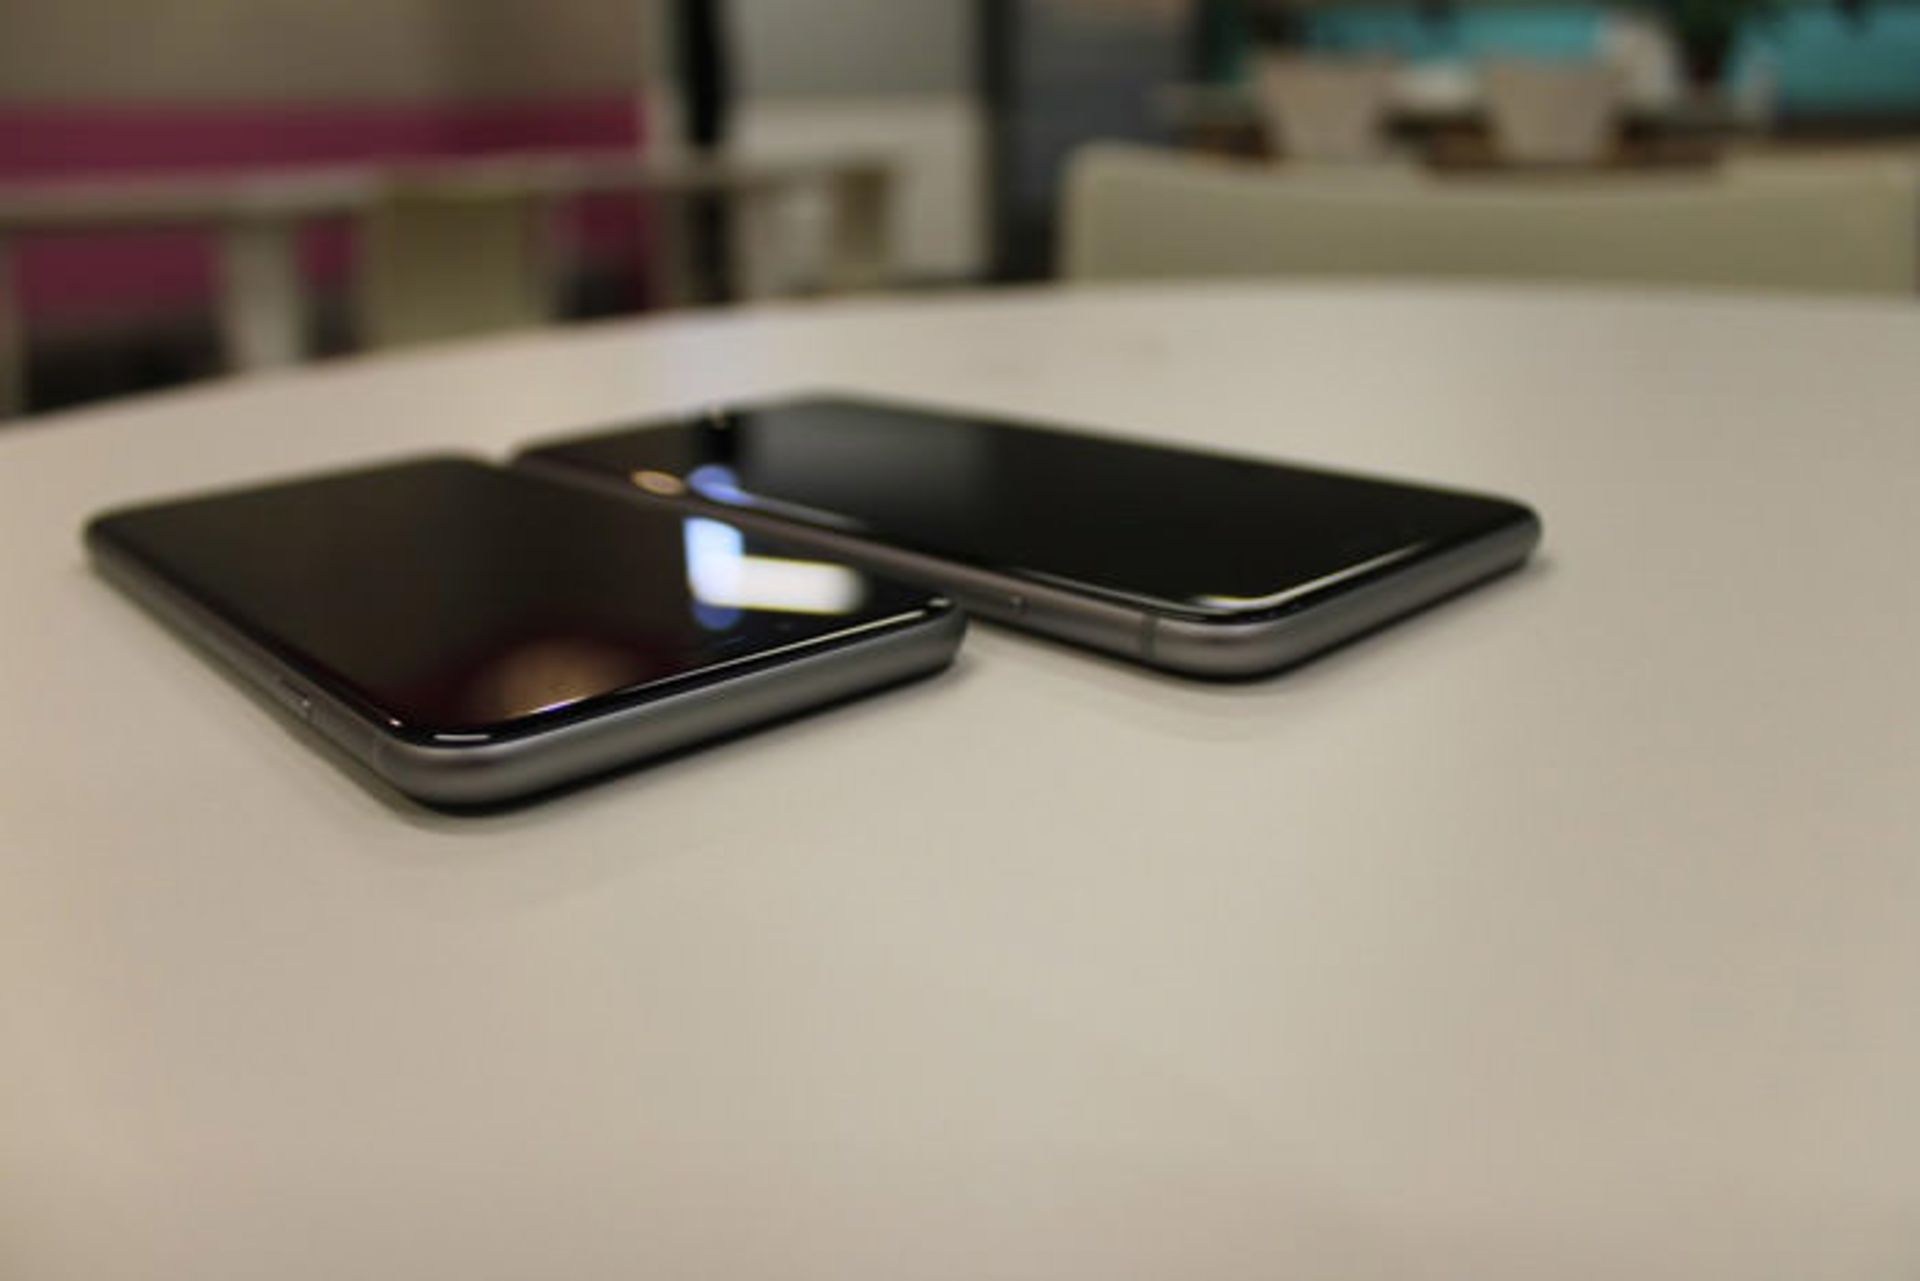 the-iphone-6-plus-is-slightly-thicker-79mm-than-the-iphone-6-69mm-but-you-probably-wont-notice